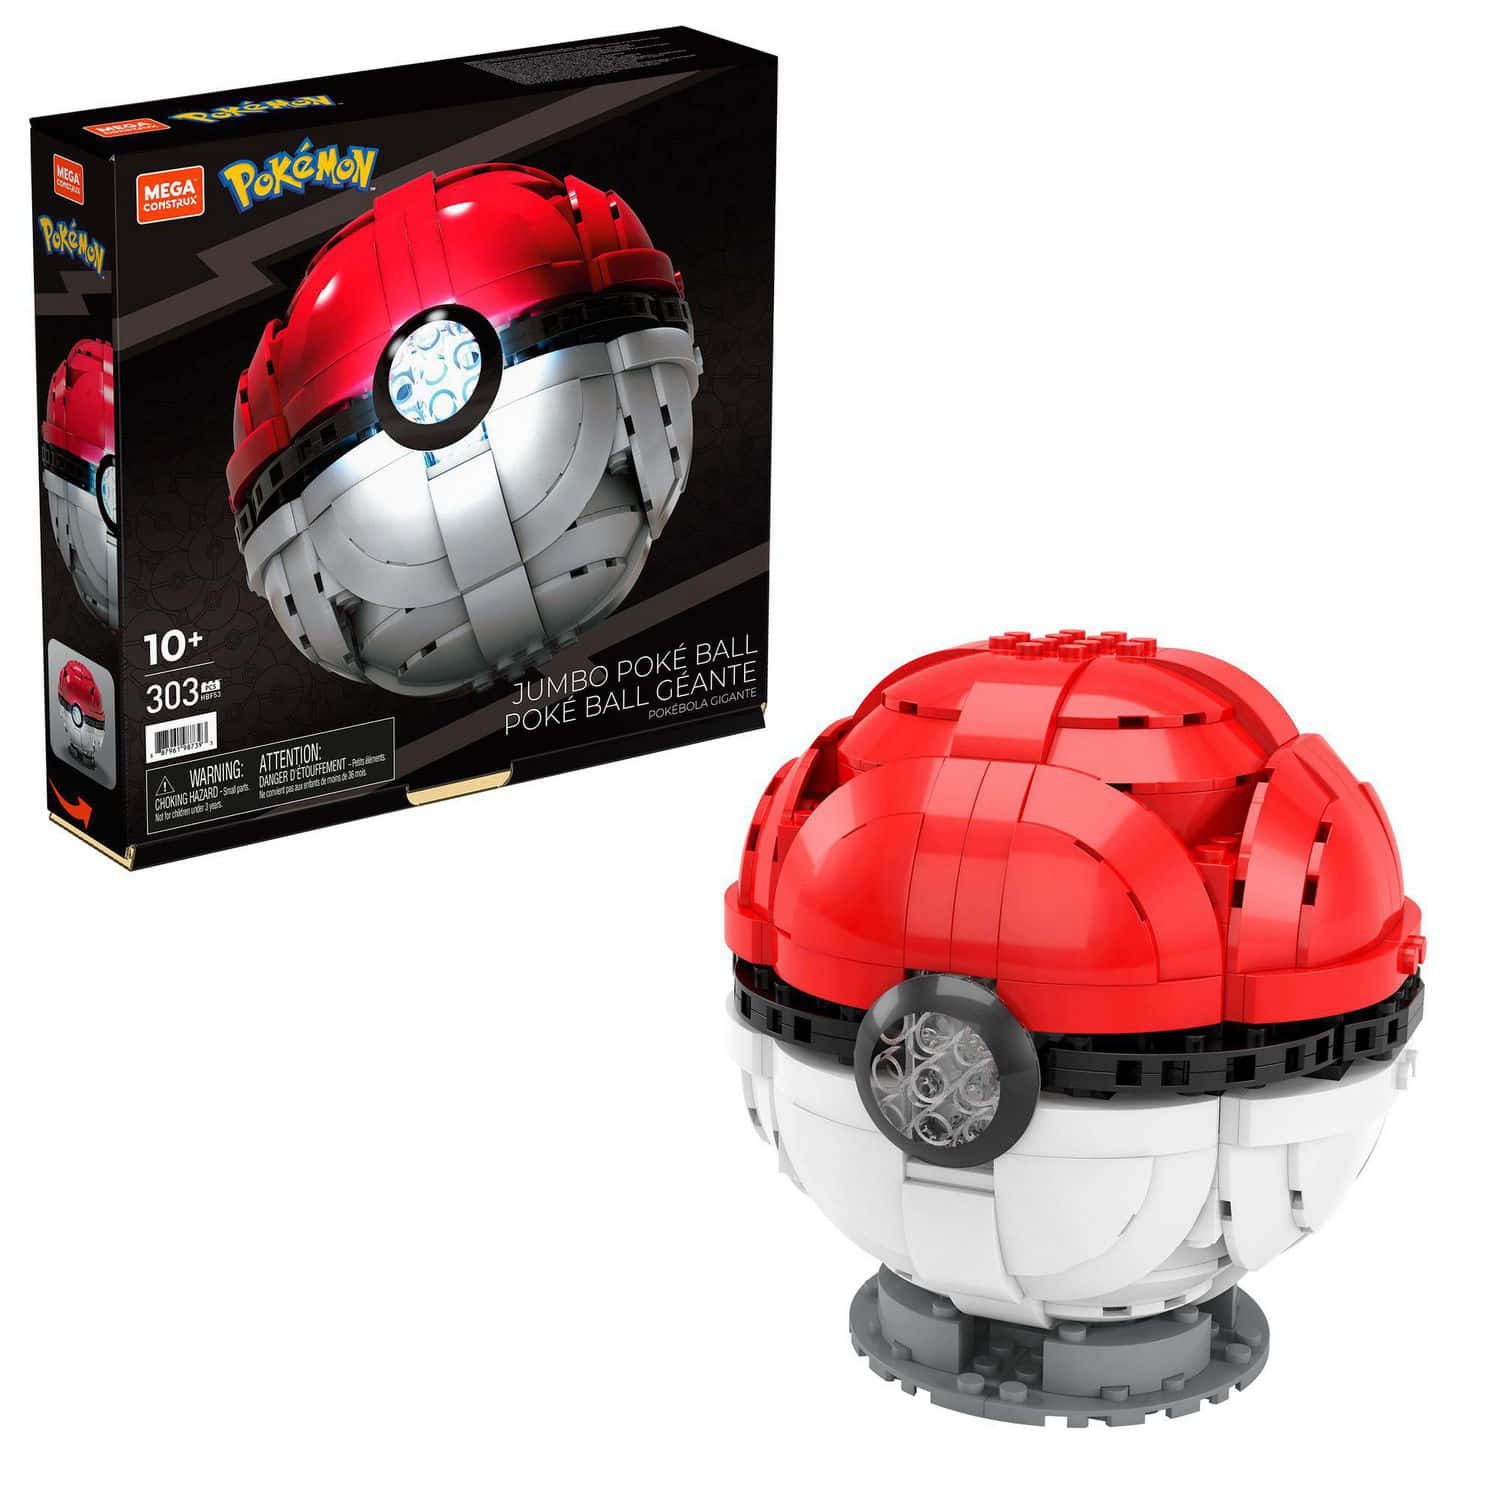 "Experience the Thrill of the Catch with a Pokeball!"